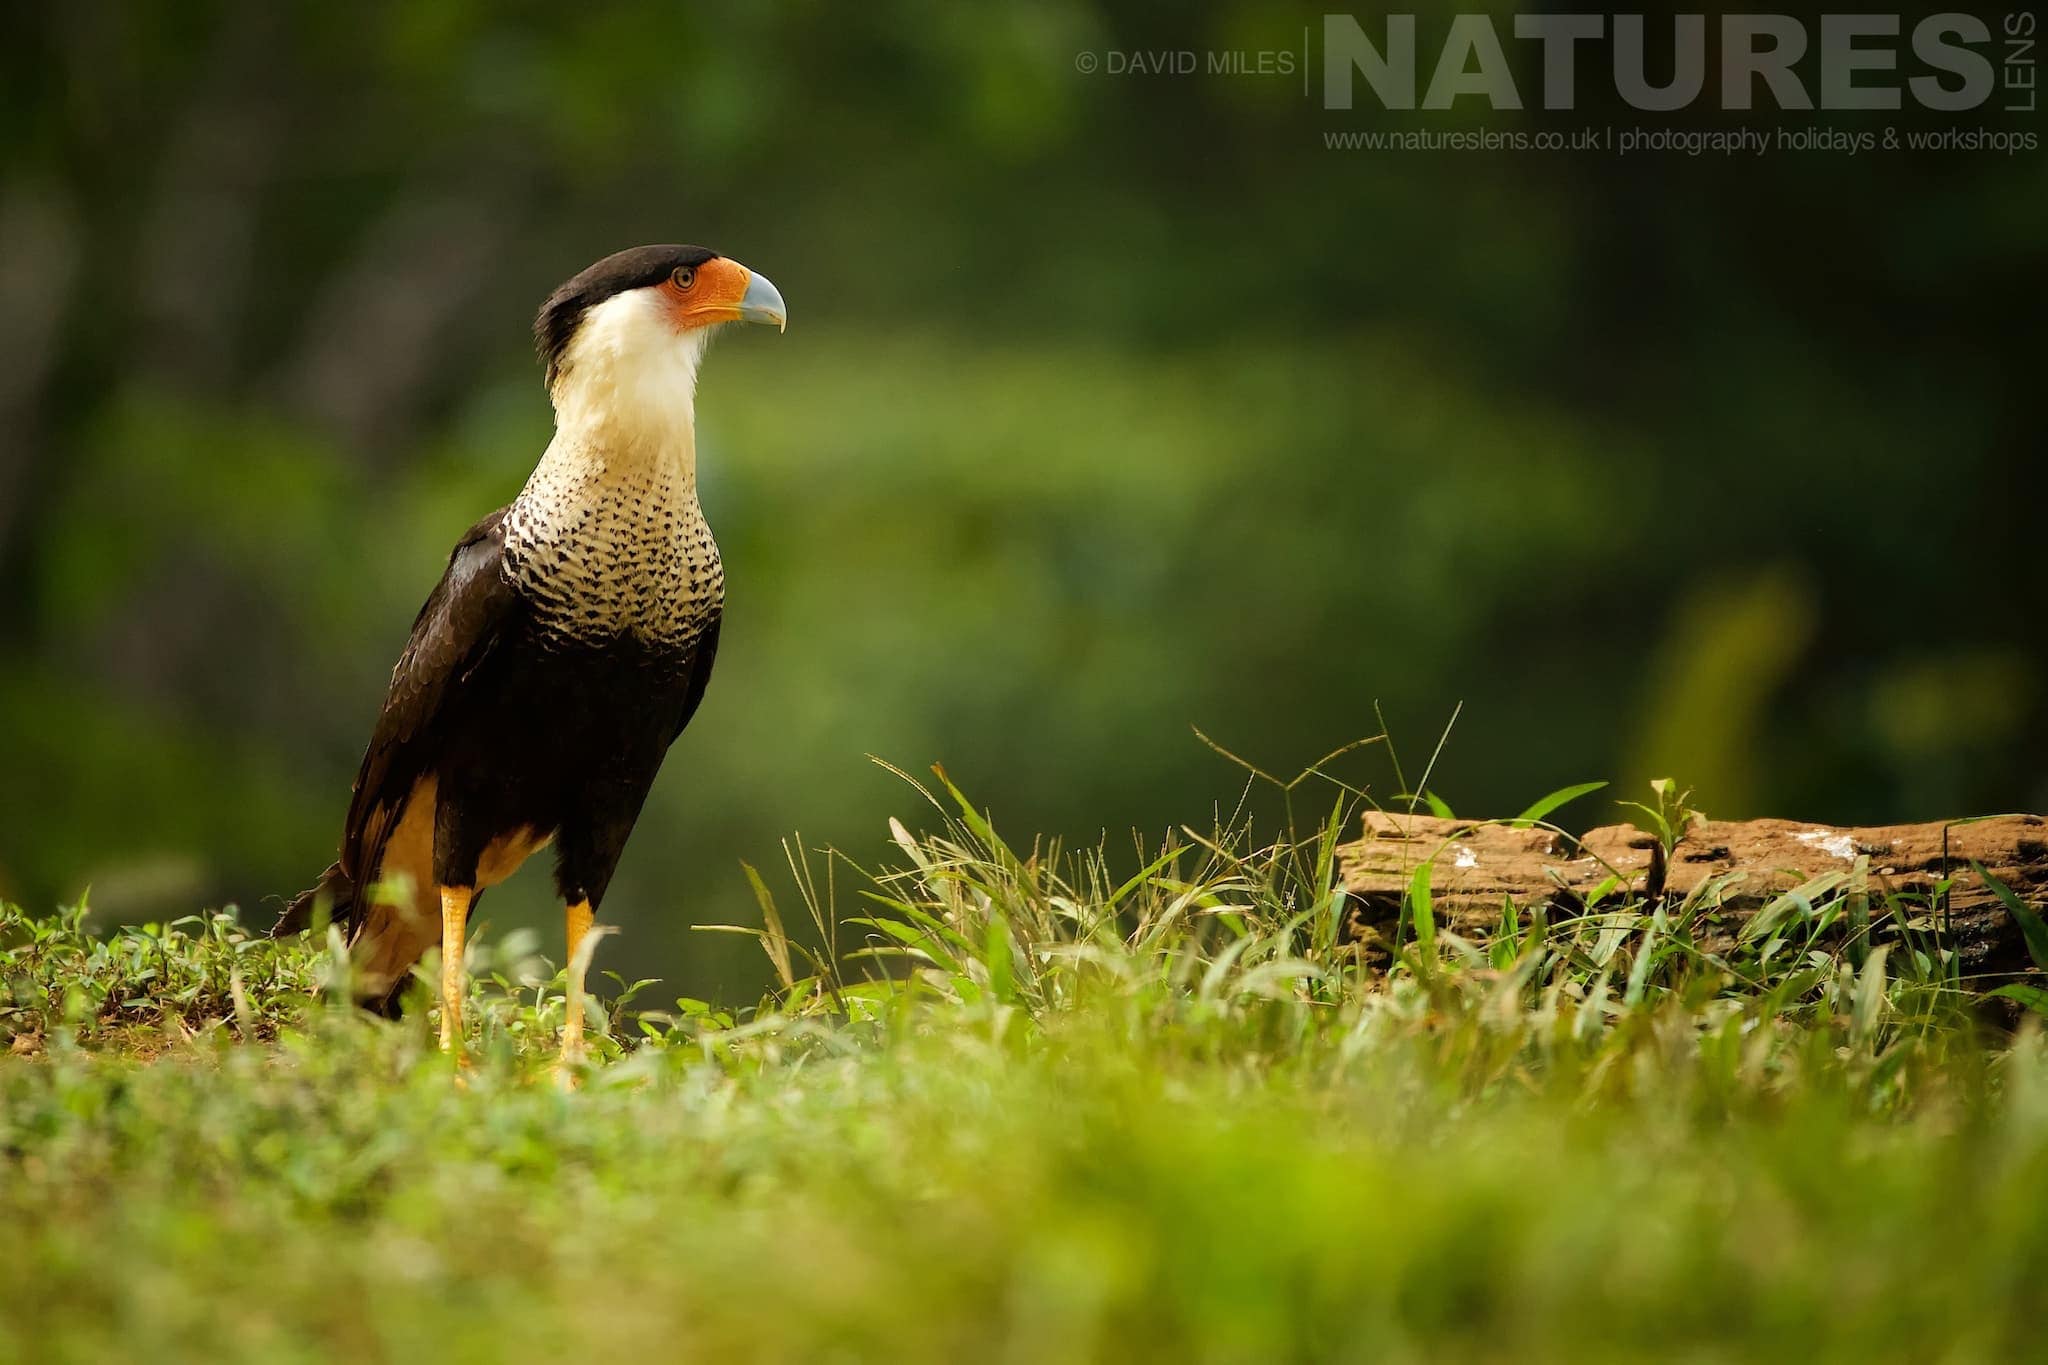 A Caracara Looks Out Across The Grass Typical Of The Kind Of Image We Hope You Will Capture During Our Costa Rican Wildlife Photography Holiday